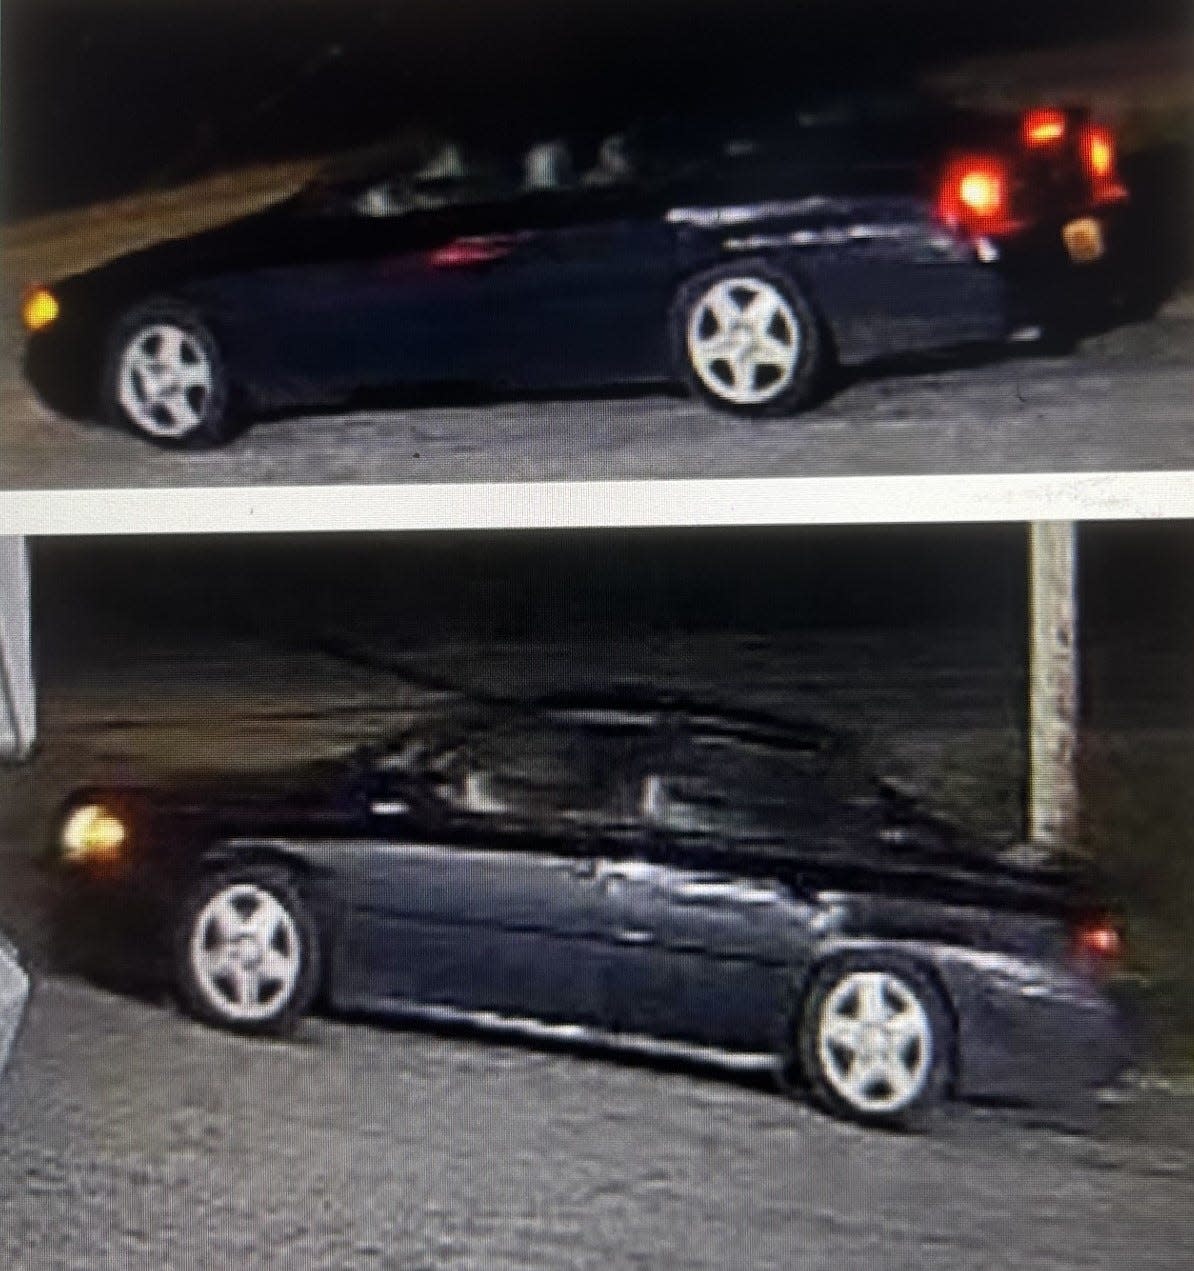 Law enforcement is asking the community for information on this vehicle. It's occupants are wanted for questioning in the Aug. 26 shooting death of 19-year-old Khia Shields of Wrens.